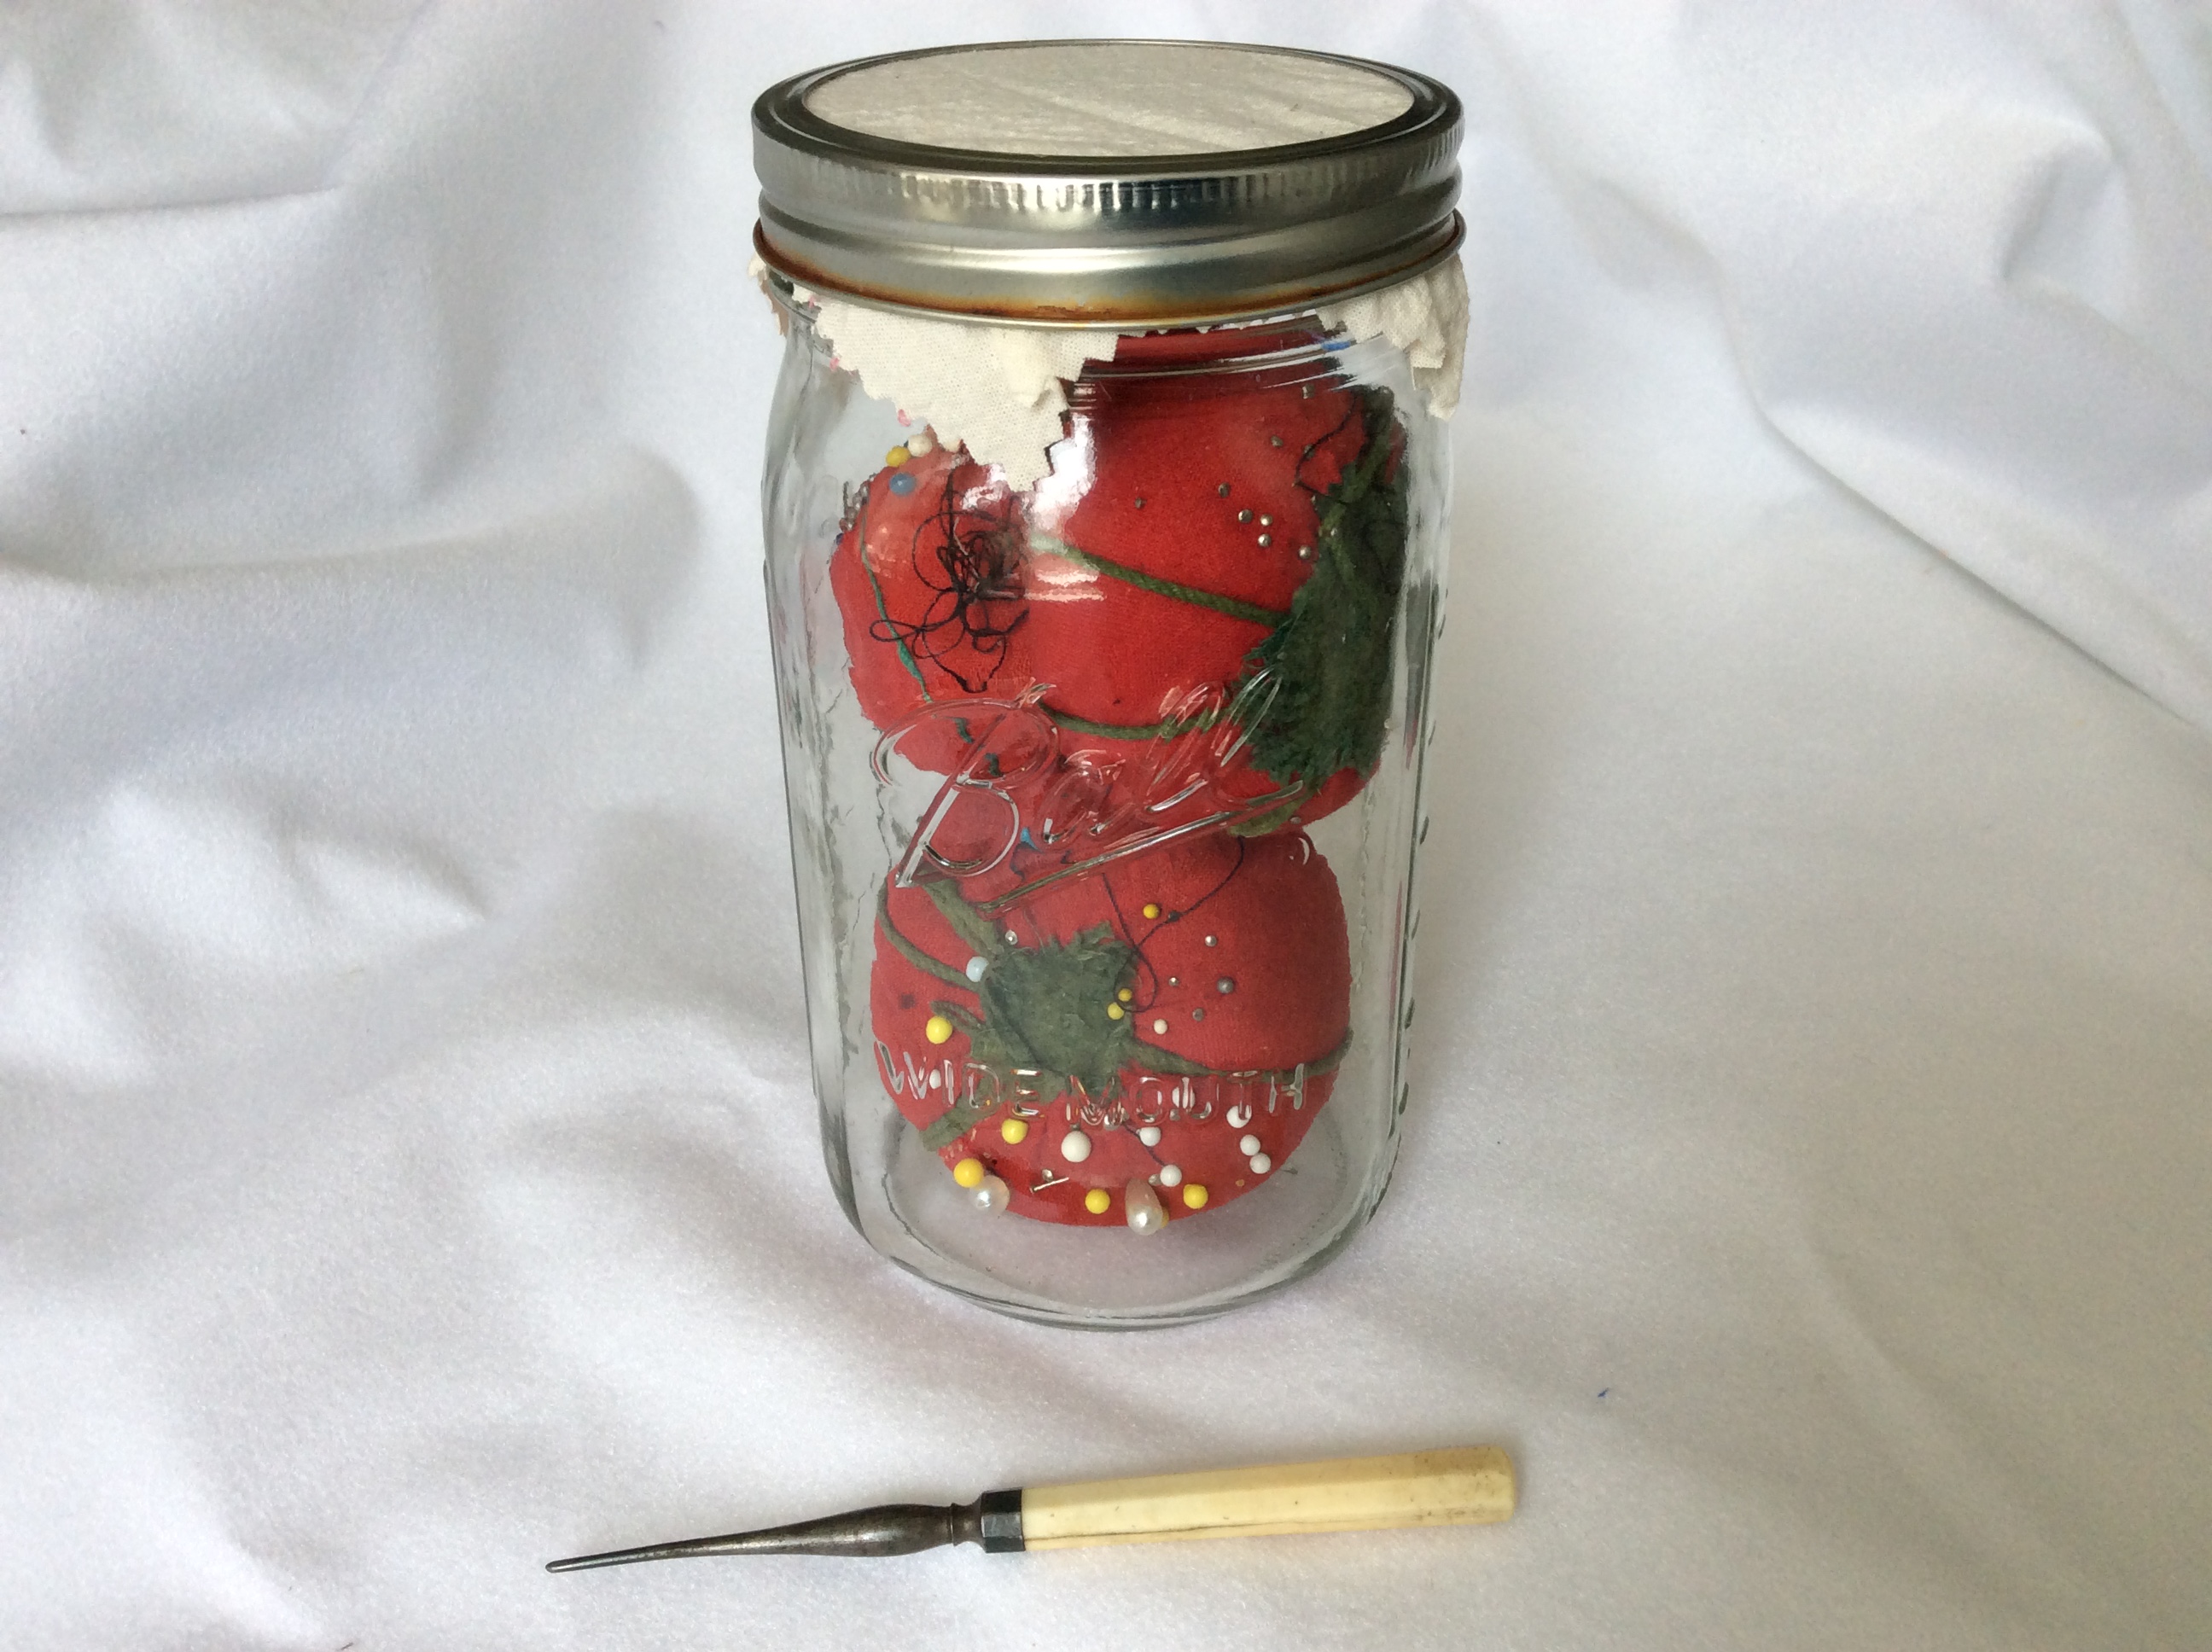 A canning jar containing tomato-shaped pincushions, and an antique tailor's awl.